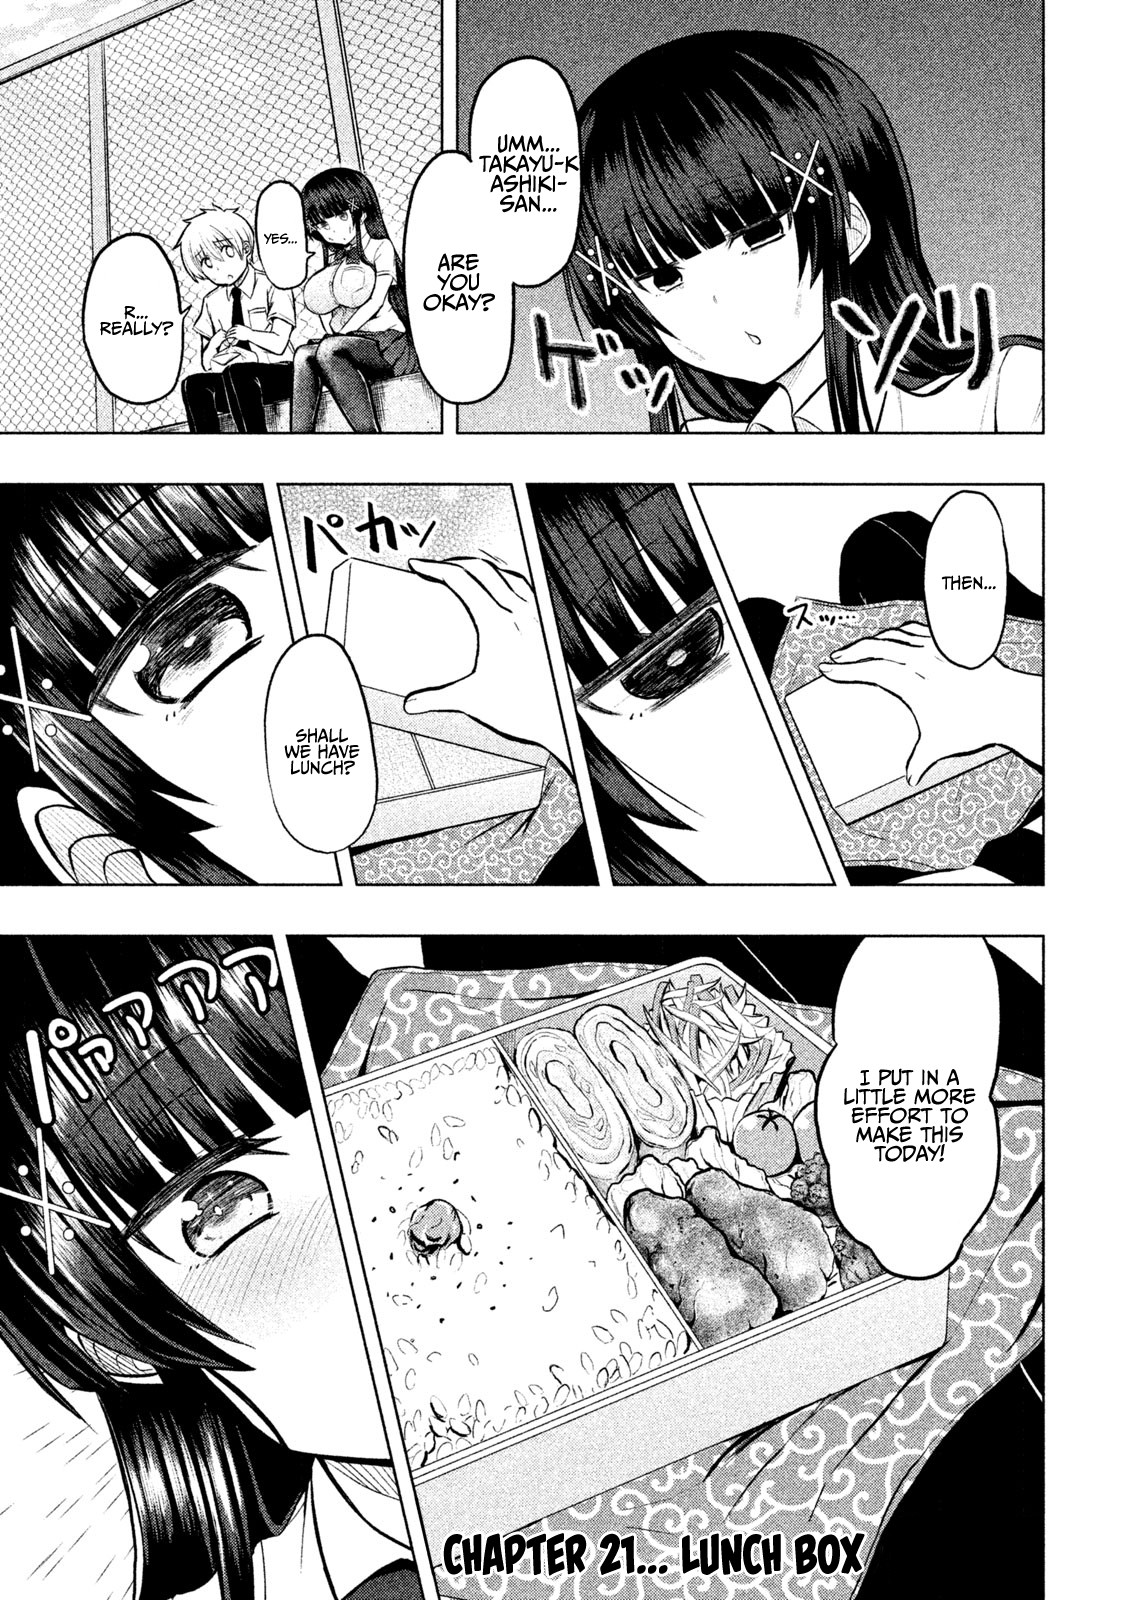 A Girl Who Is Very Well-Informed About Weird Knowledge, Takayukashiki Souko-San Chapter 21 #2